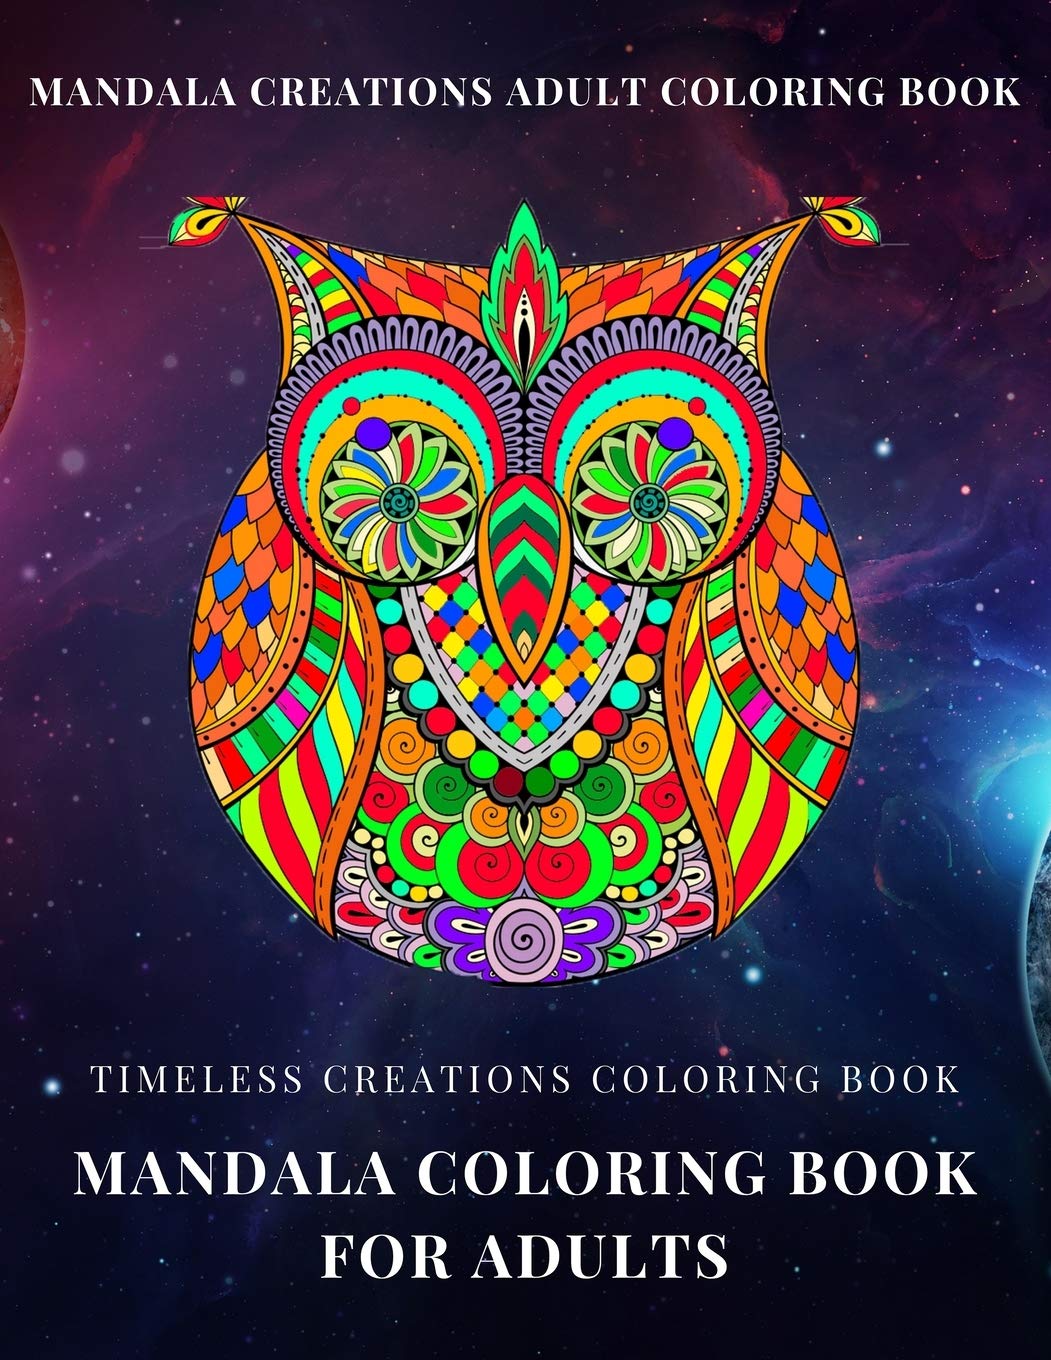 Timeless Creations Coloring Book: A Perfect Coloring Book for Adult and Teenagers Boys, Girls for Relaxation & Mindfulness [Book]